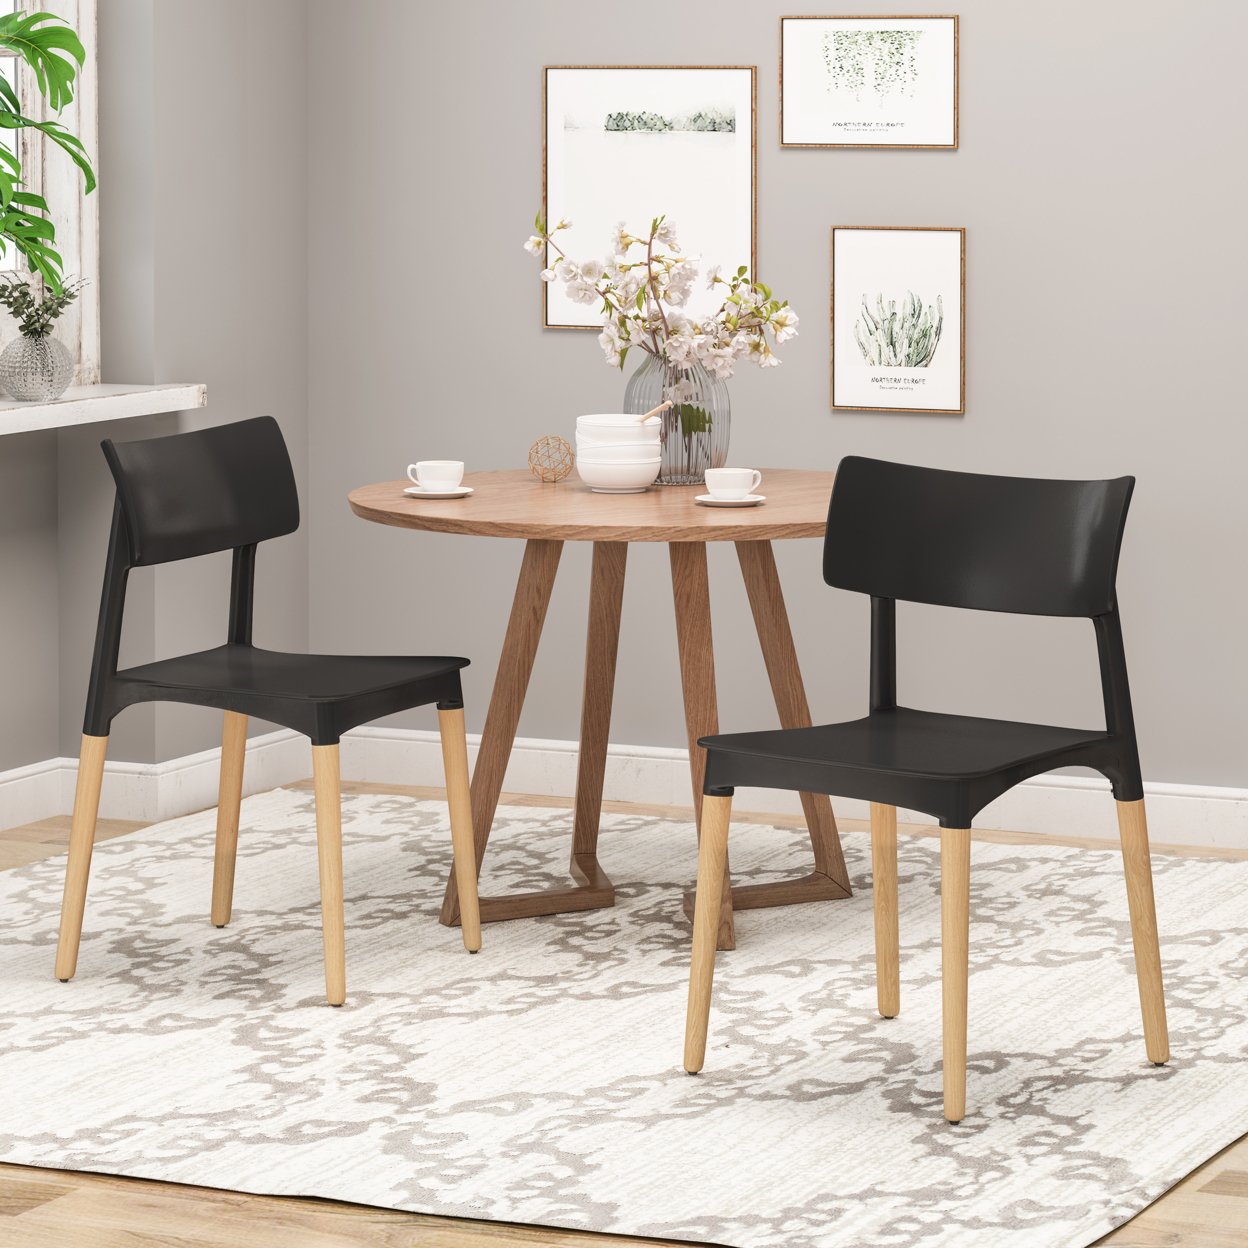 Isabel Modern Dining Chair With Beech Wood Legs (Set Of 2). White And Natural Finish - Black + Natural